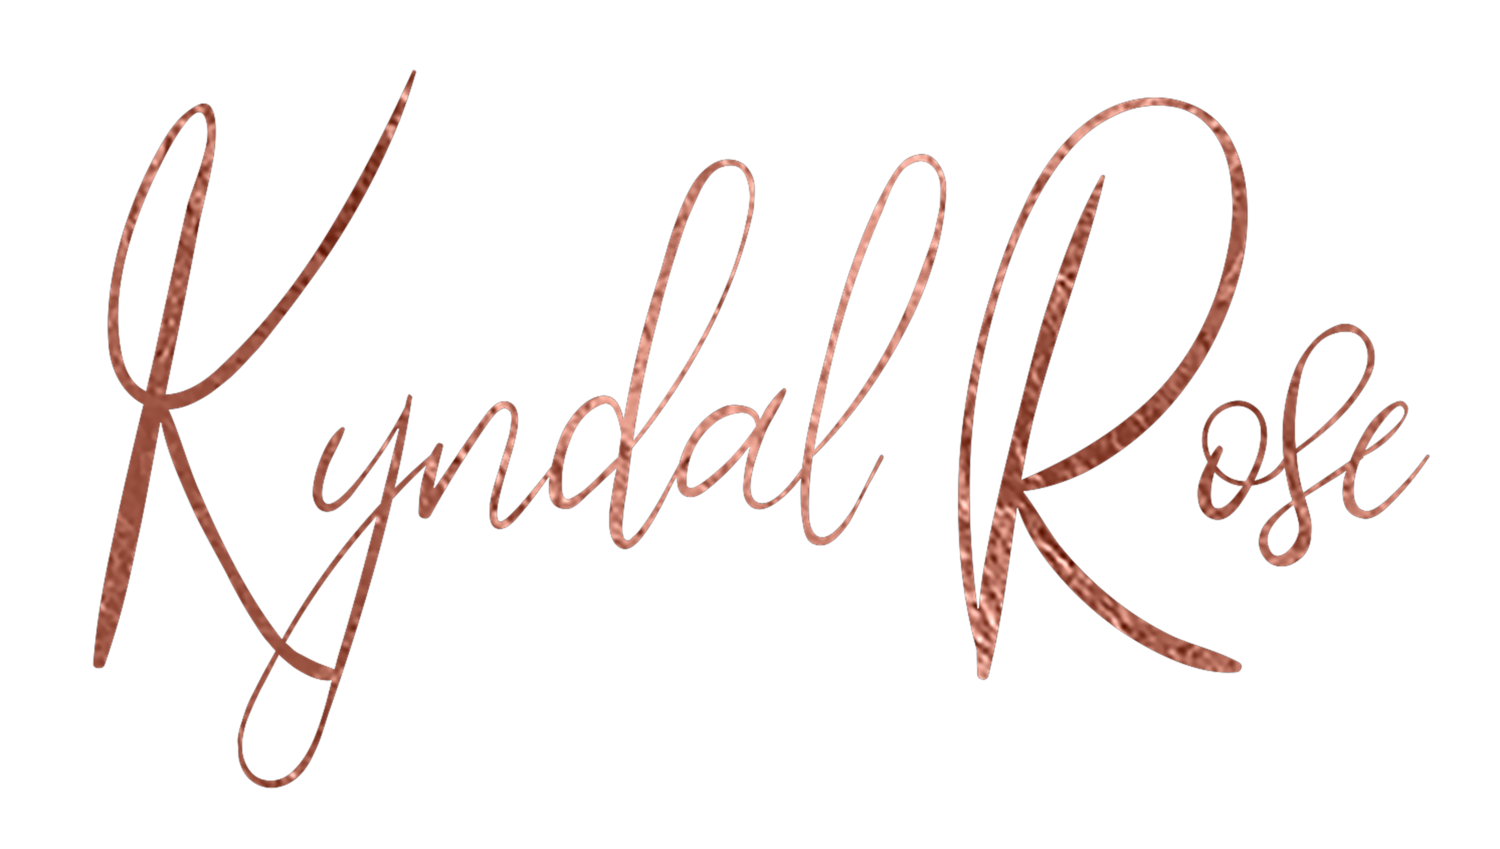 Kyndal Rose Photography + Doula Services